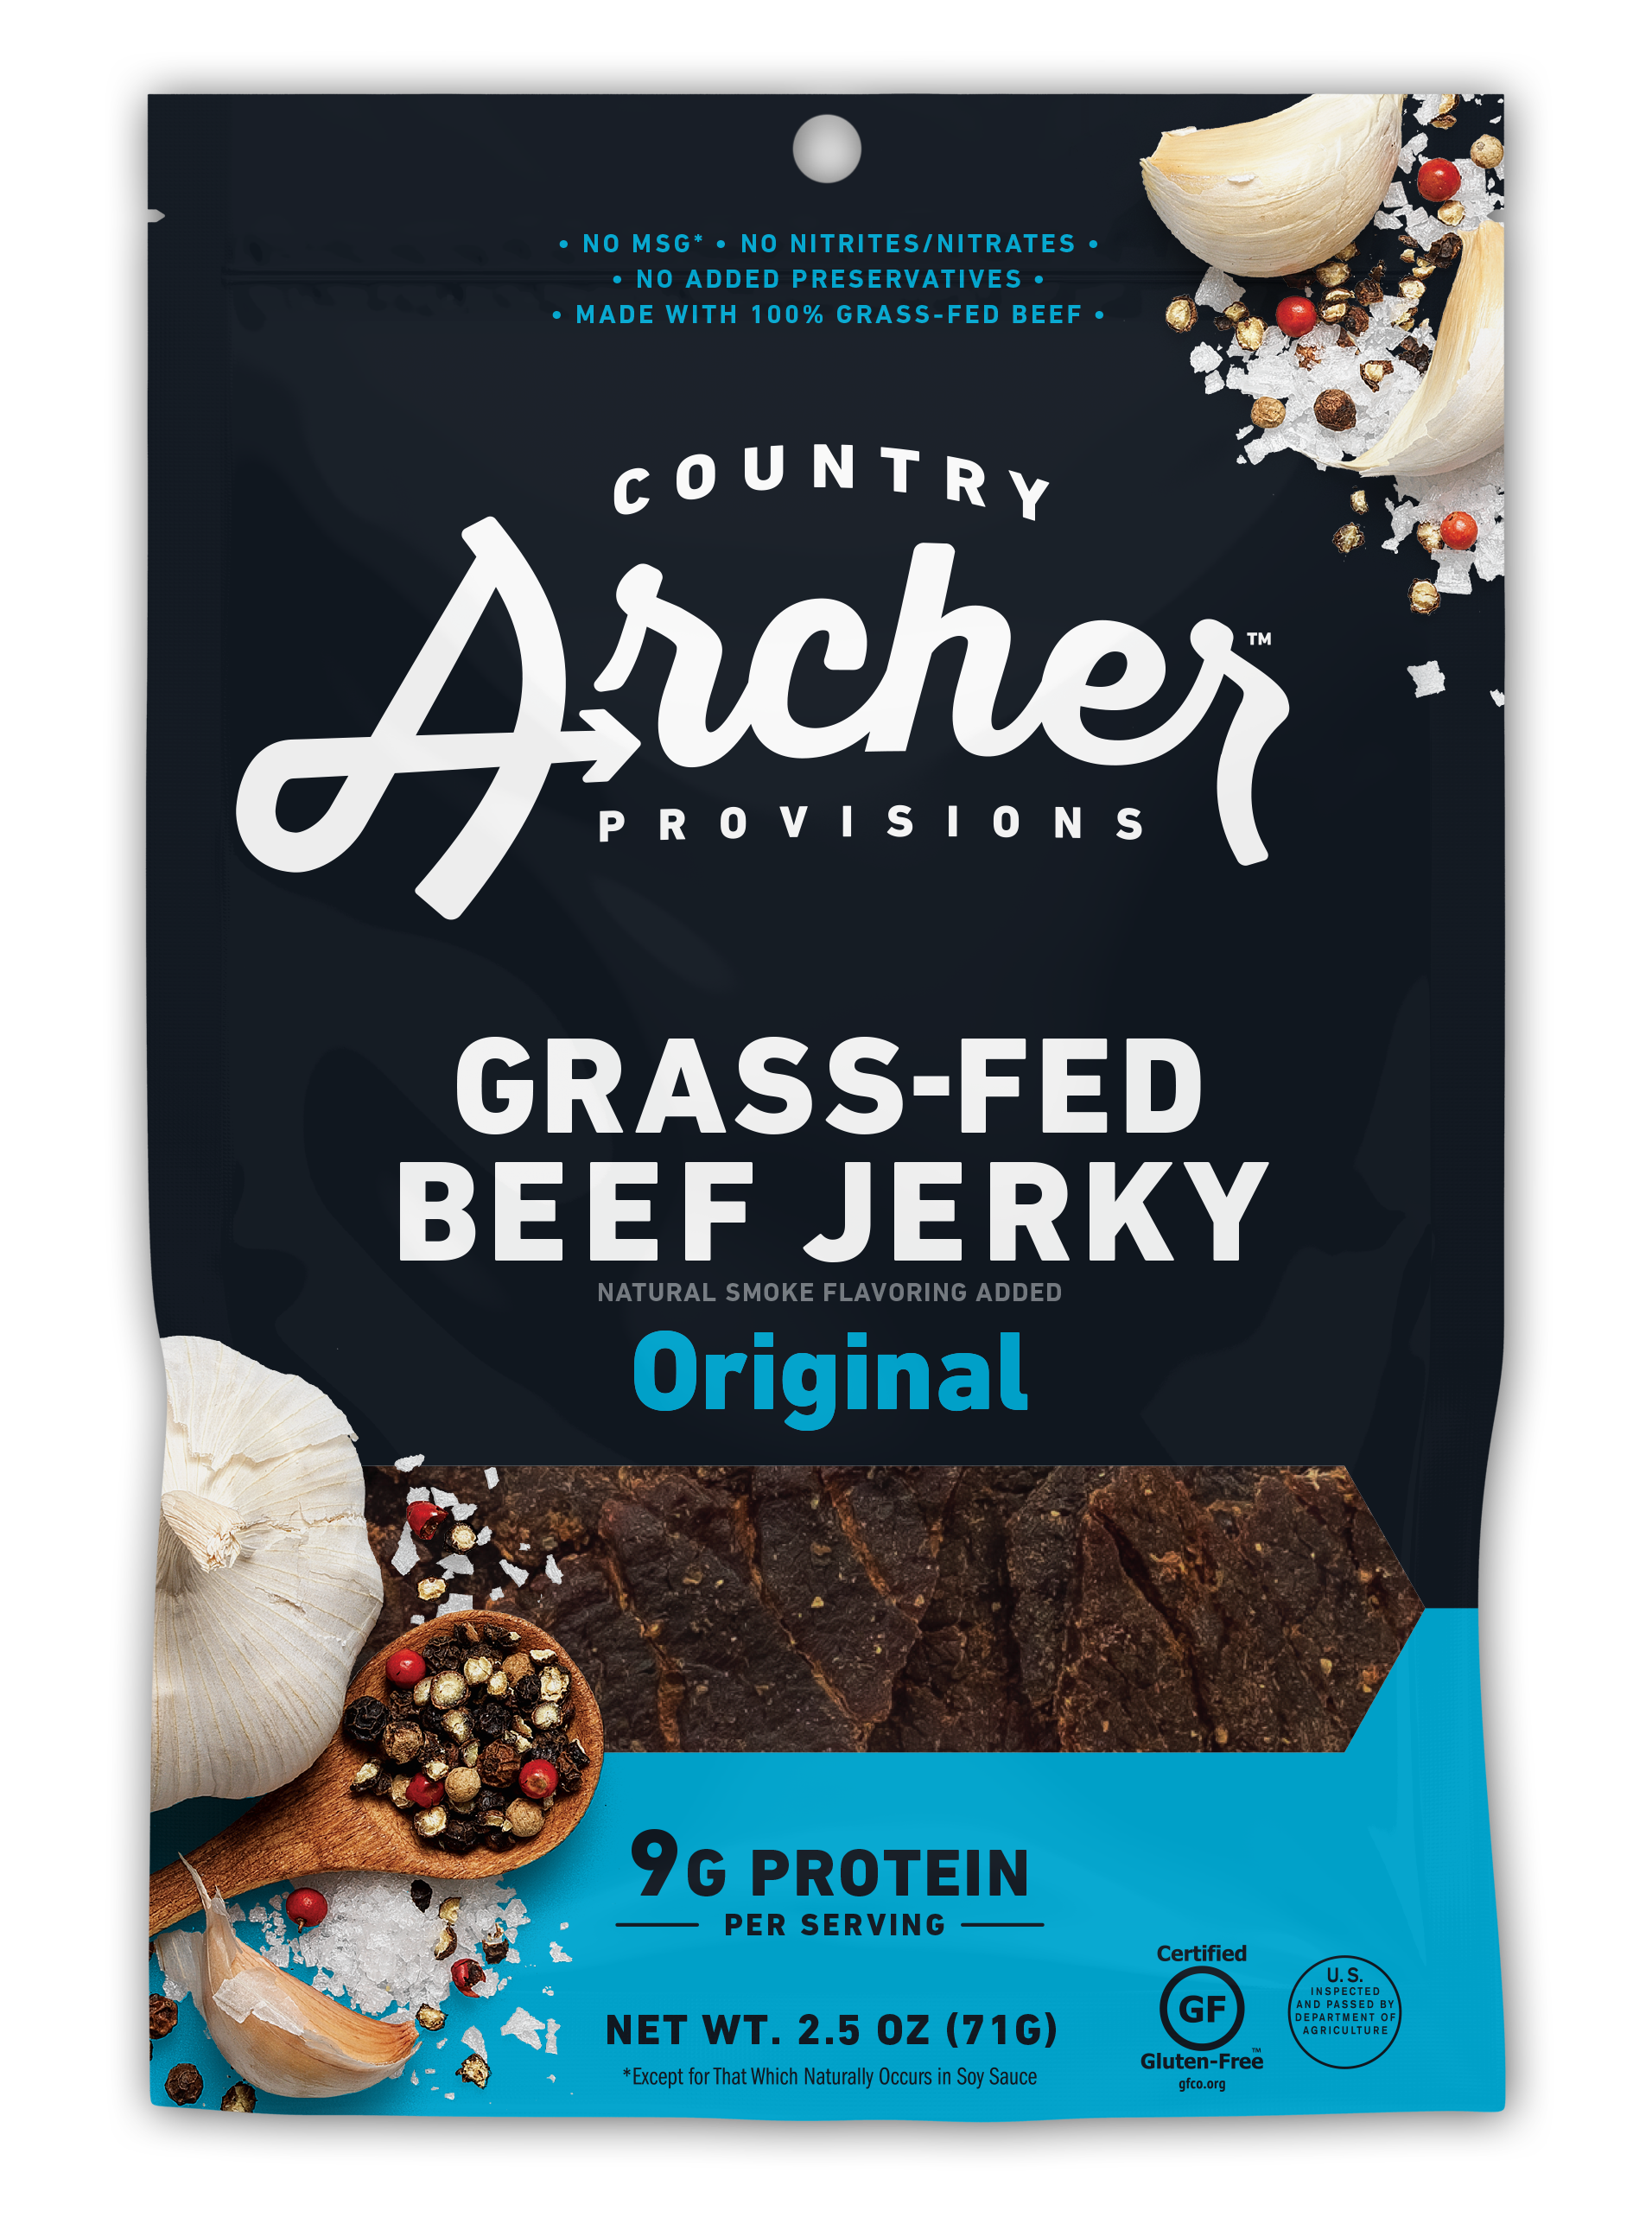 bag of grass fed Country Archer beef jerky 